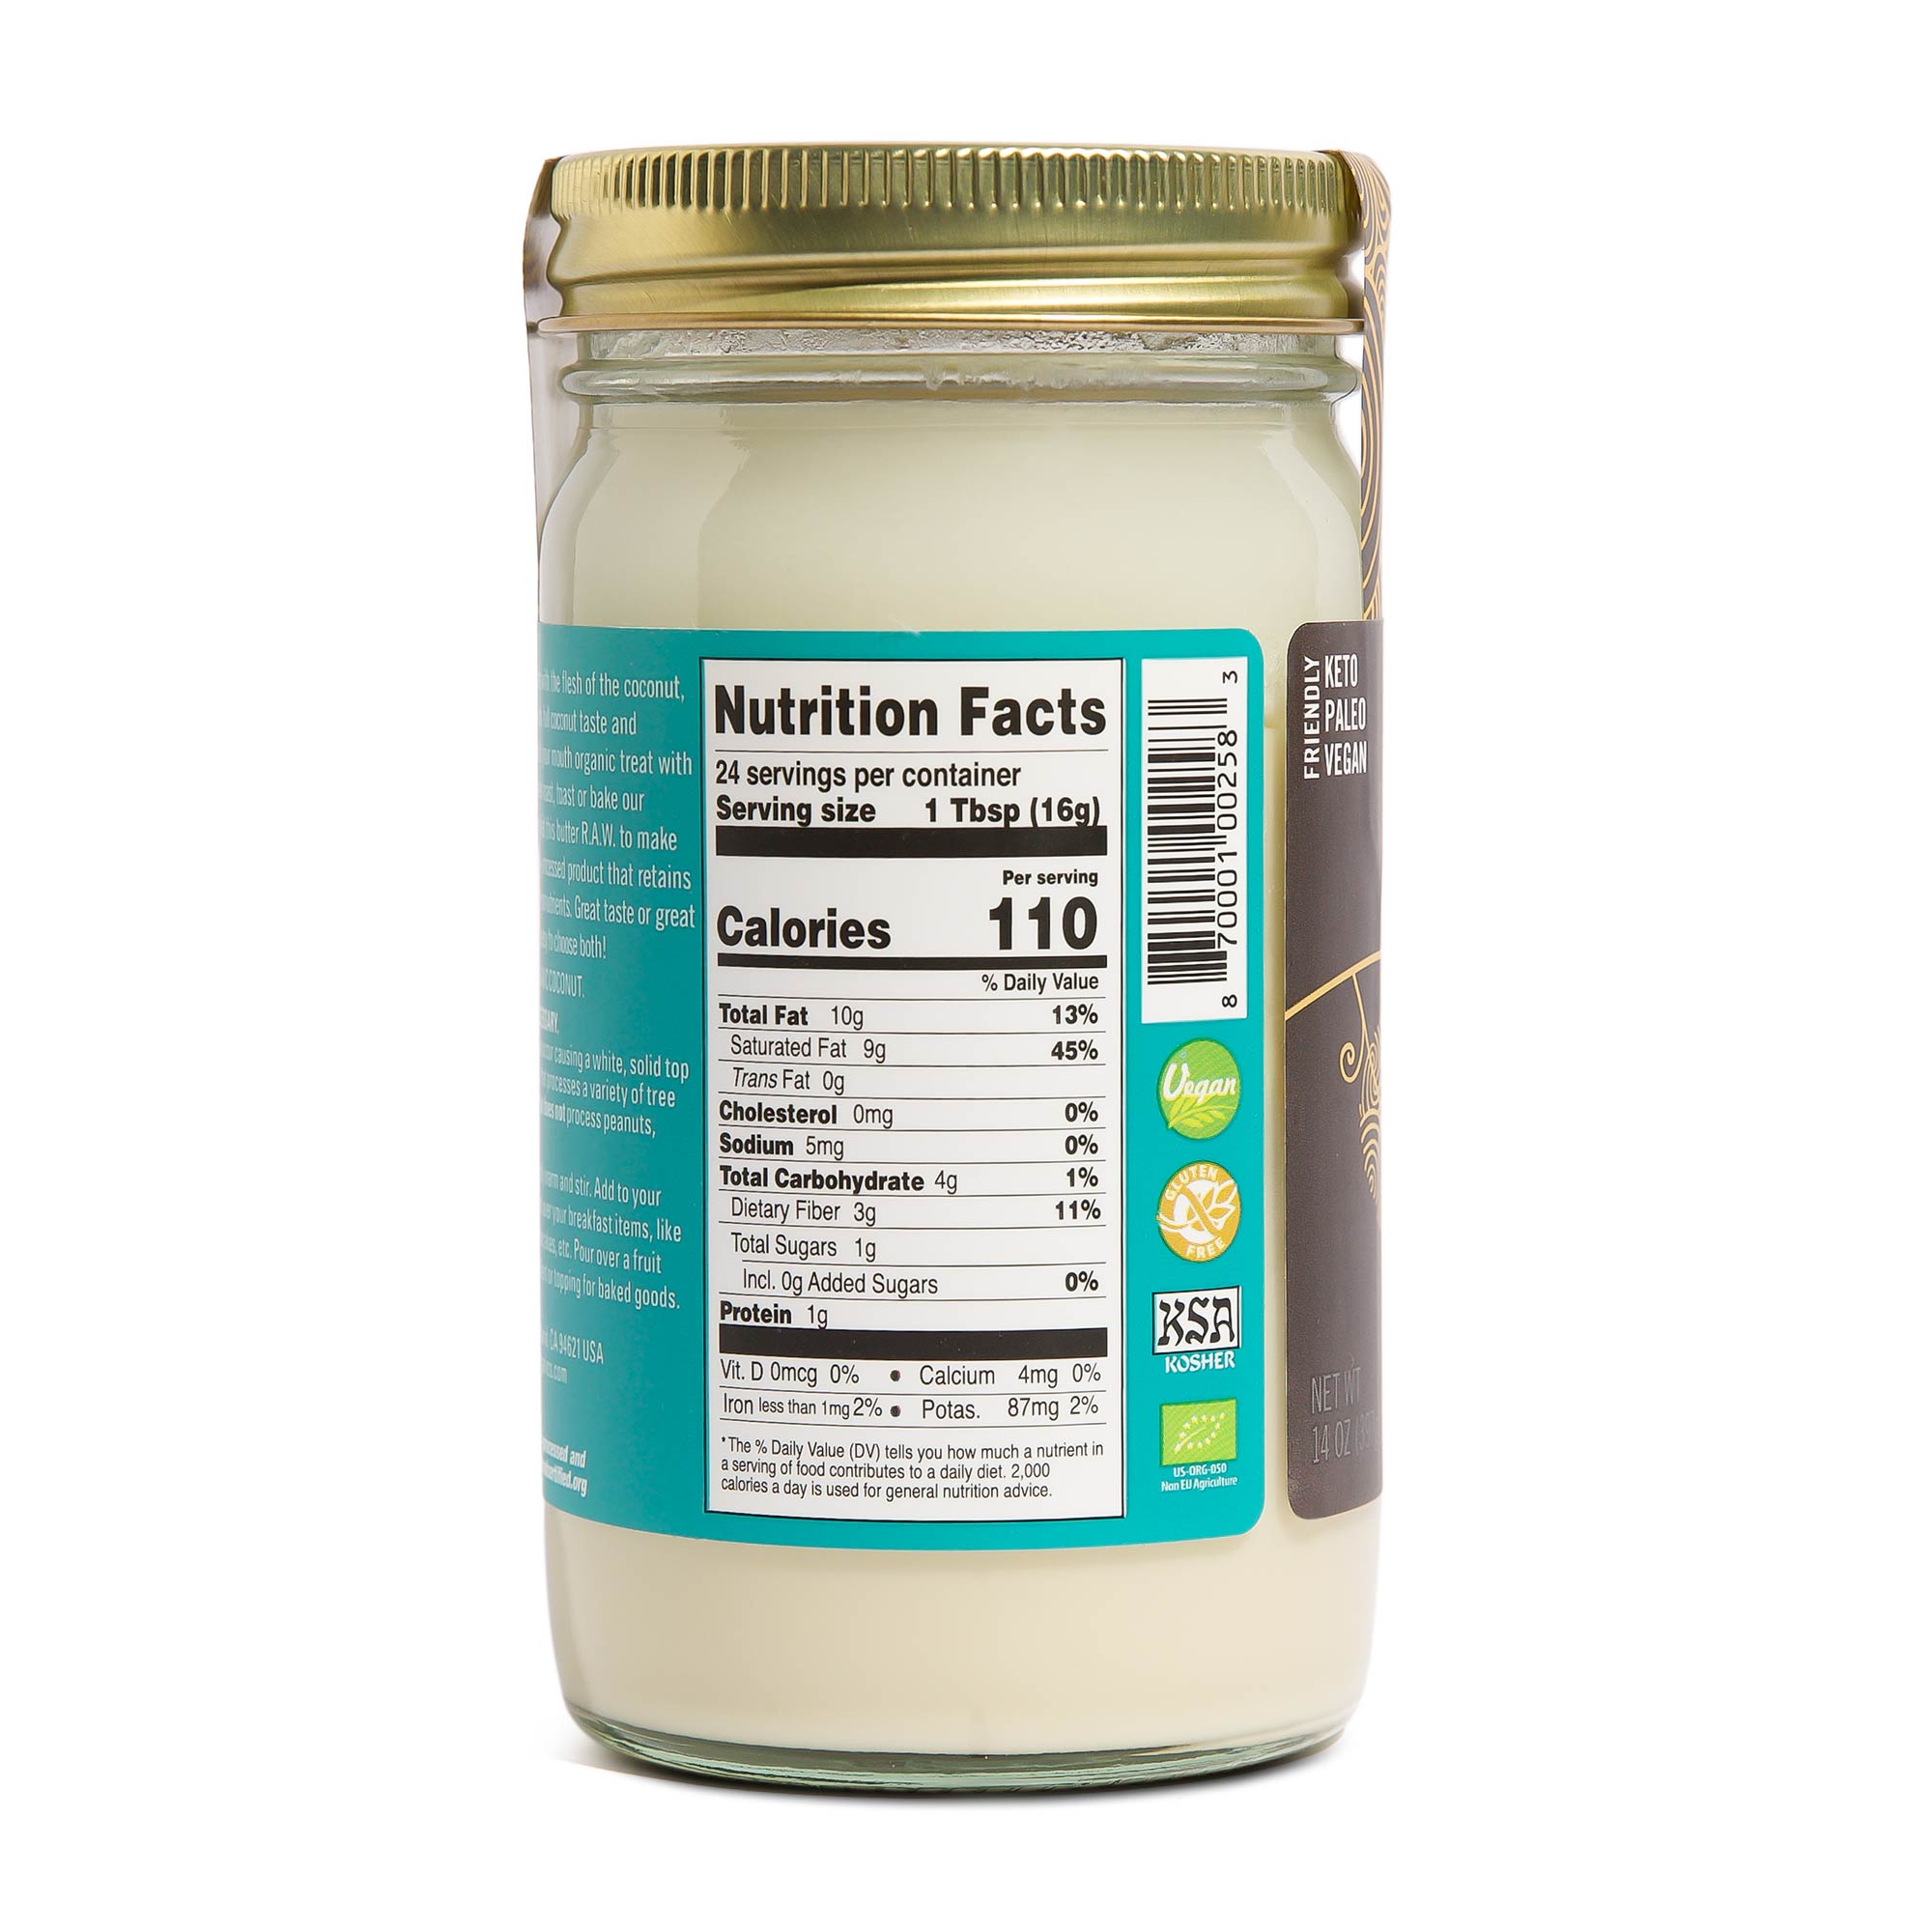 Back side of jar with Nutrition Facts label. 110 calories per serving (one tablespoon).